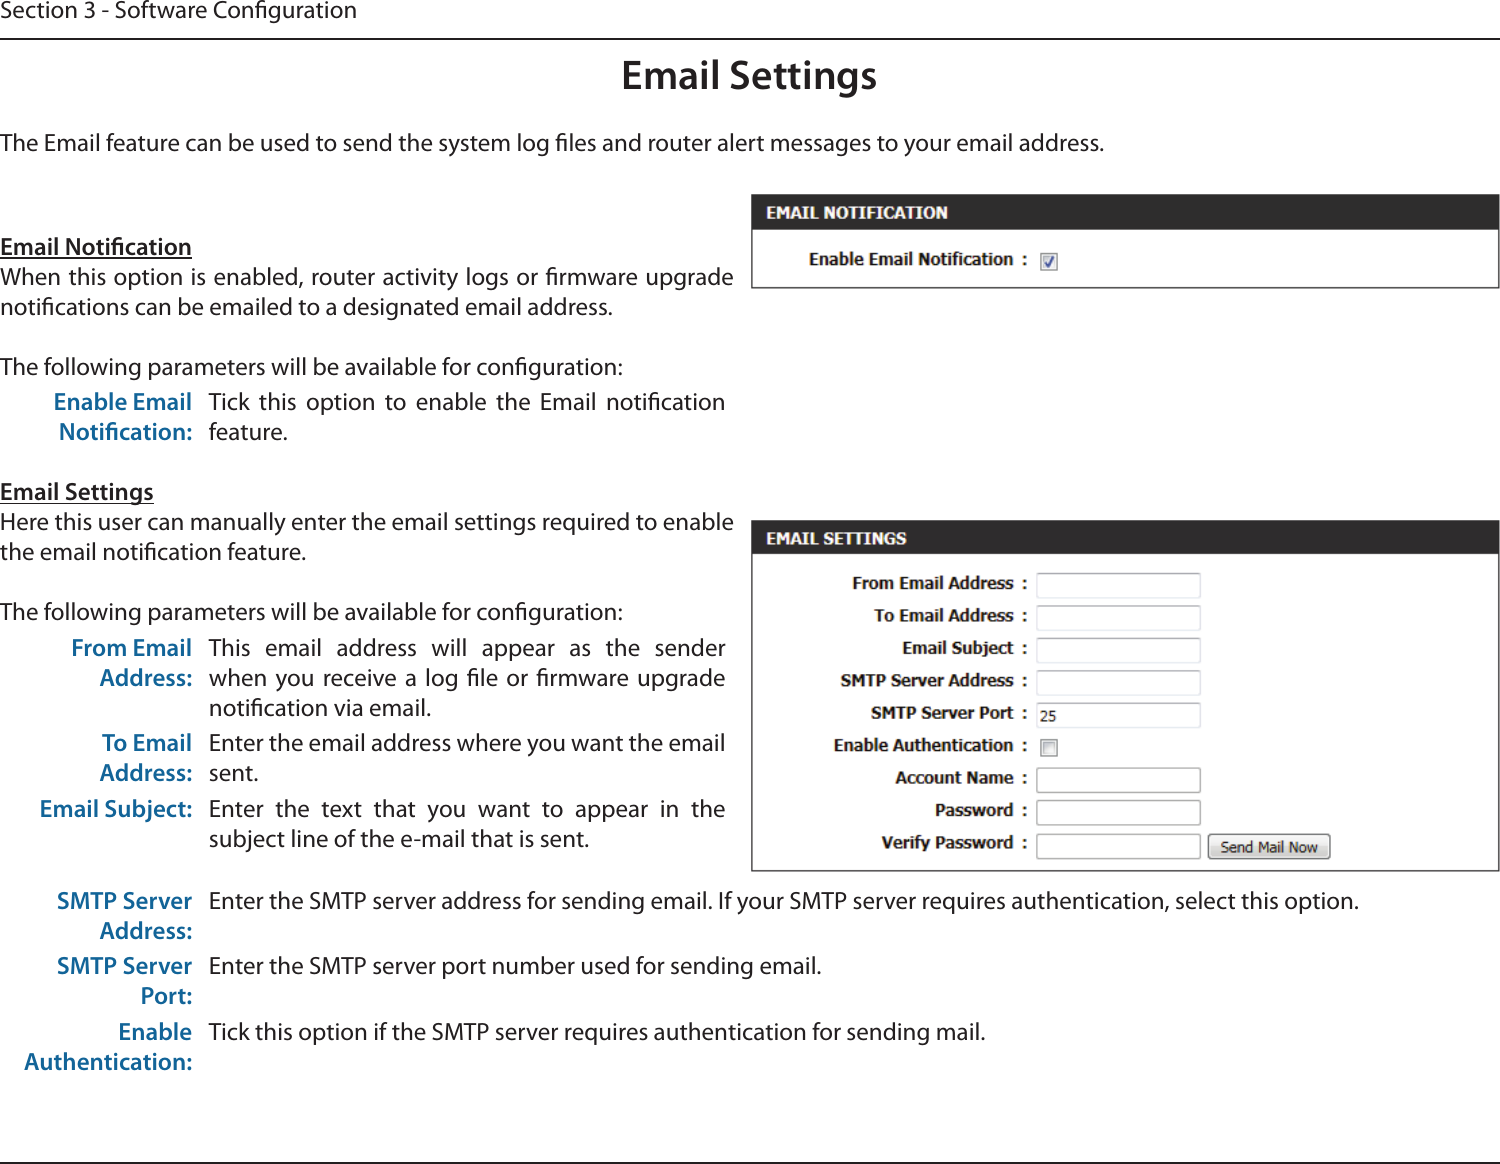 Section 3 - Software CongurationEmail SettingsEmail NoticationWhen this option is enabled, router activity logs or rmware upgrade notications can be emailed to a designated email address.The following parameters will be available for conguration:Enable Email Notication:Tick  this  option  to  enable  the  Email  notication feature.Email SettingsHere this user can manually enter the email settings required to enable the email notication feature.The following parameters will be available for conguration:From Email Address:This  email  address  will  appear  as  the  sender when you  receive a log le or  rmware  upgrade notication via email.To Email Address:Enter the email address where you want the email sent.Email Subject: Enter  the  text  that  you  want  to  appear  in  the subject line of the e-mail that is sent.SMTP Server Address:Enter the SMTP server address for sending email. If your SMTP server requires authentication, select this option.SMTP Server Port:Enter the SMTP server port number used for sending email. Enable Authentication:Tick this option if the SMTP server requires authentication for sending mail.The Email feature can be used to send the system log les and router alert messages to your email address.